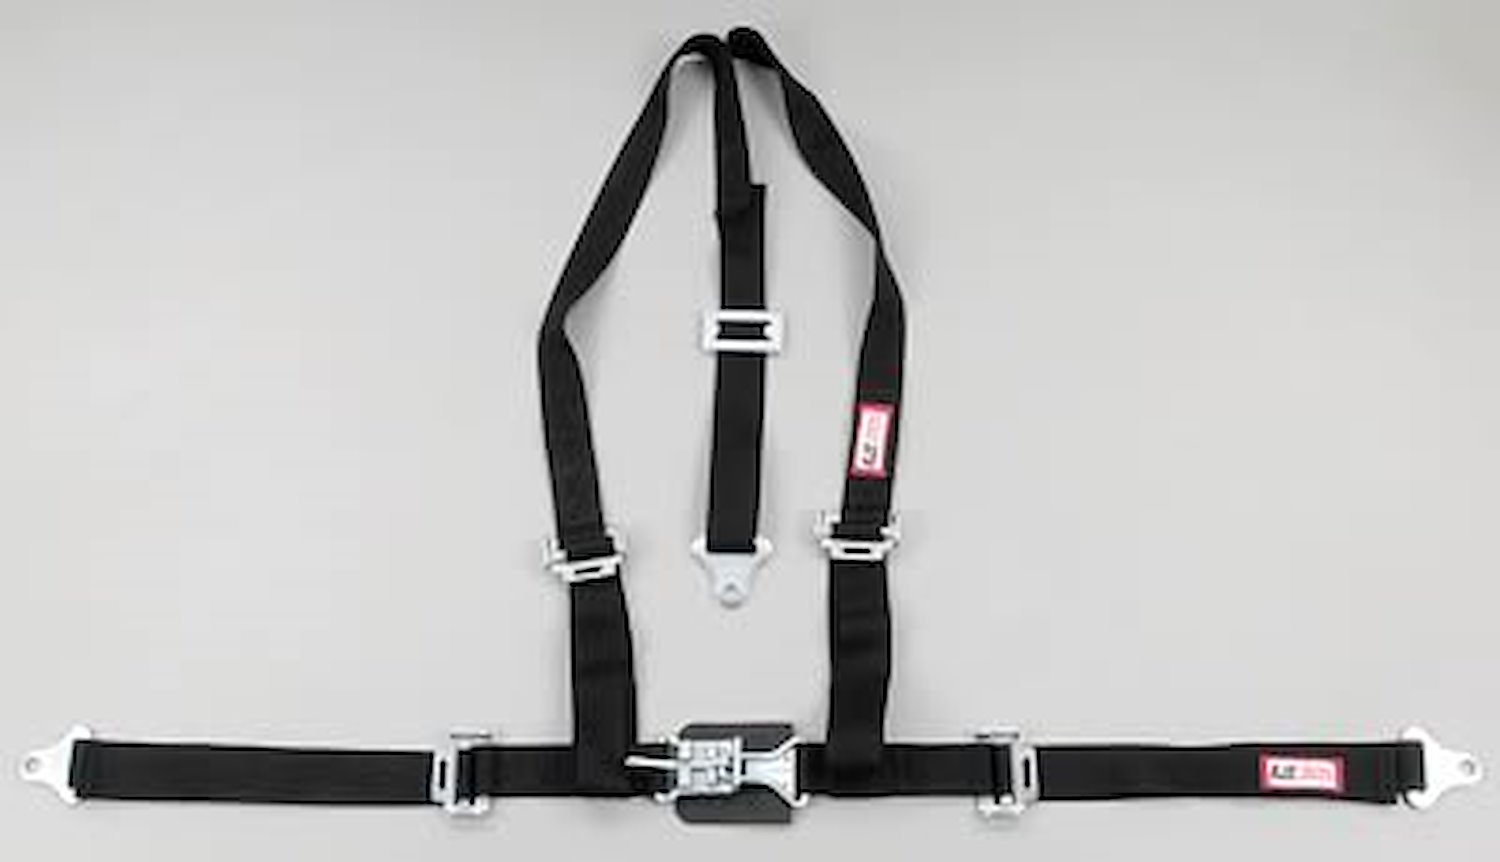 NON-SFI L&L HARNESS 2 PULL UP Lap Belt w/Adjuster 2 S.H. Y FLOOR MOUNT w/STERNUM STRAP ALL WRAP ENDS KHAKI